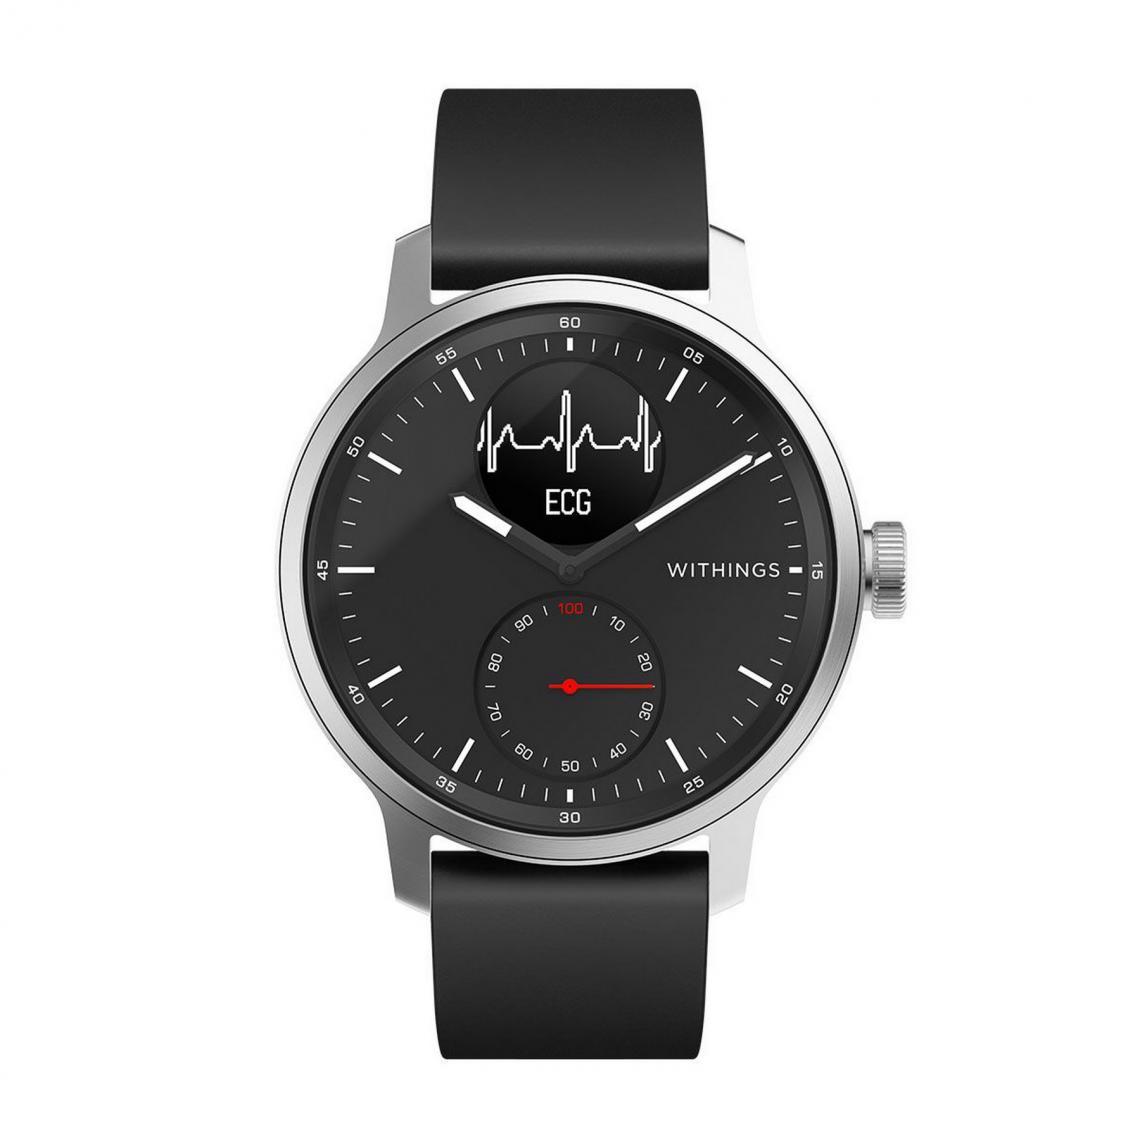 Withings - Montre connectée Homme WITHINGS Montres SCANWATCH 3 Aiguilles - Induction HWA09-model 4-All-Int - Bracelet Silicone Noir - Montre connectée